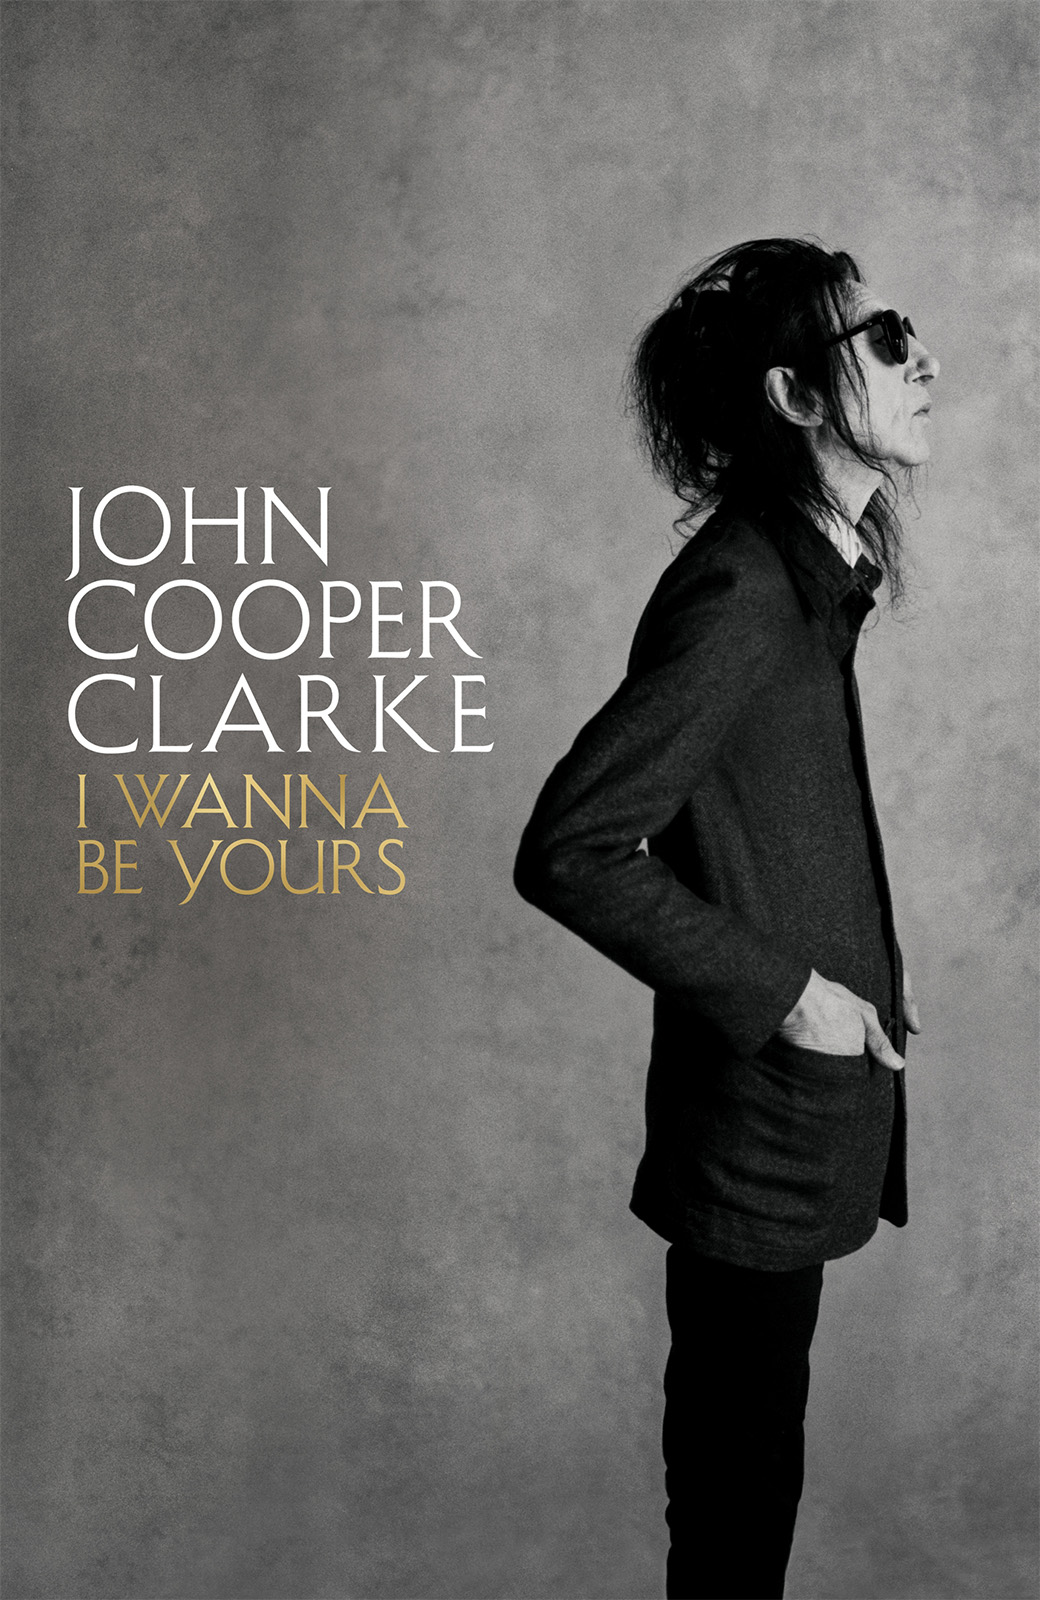 CONTENTS JOHN COOPER CLARKE I WANNA BE YOURS In memory of my late nephew - photo 1